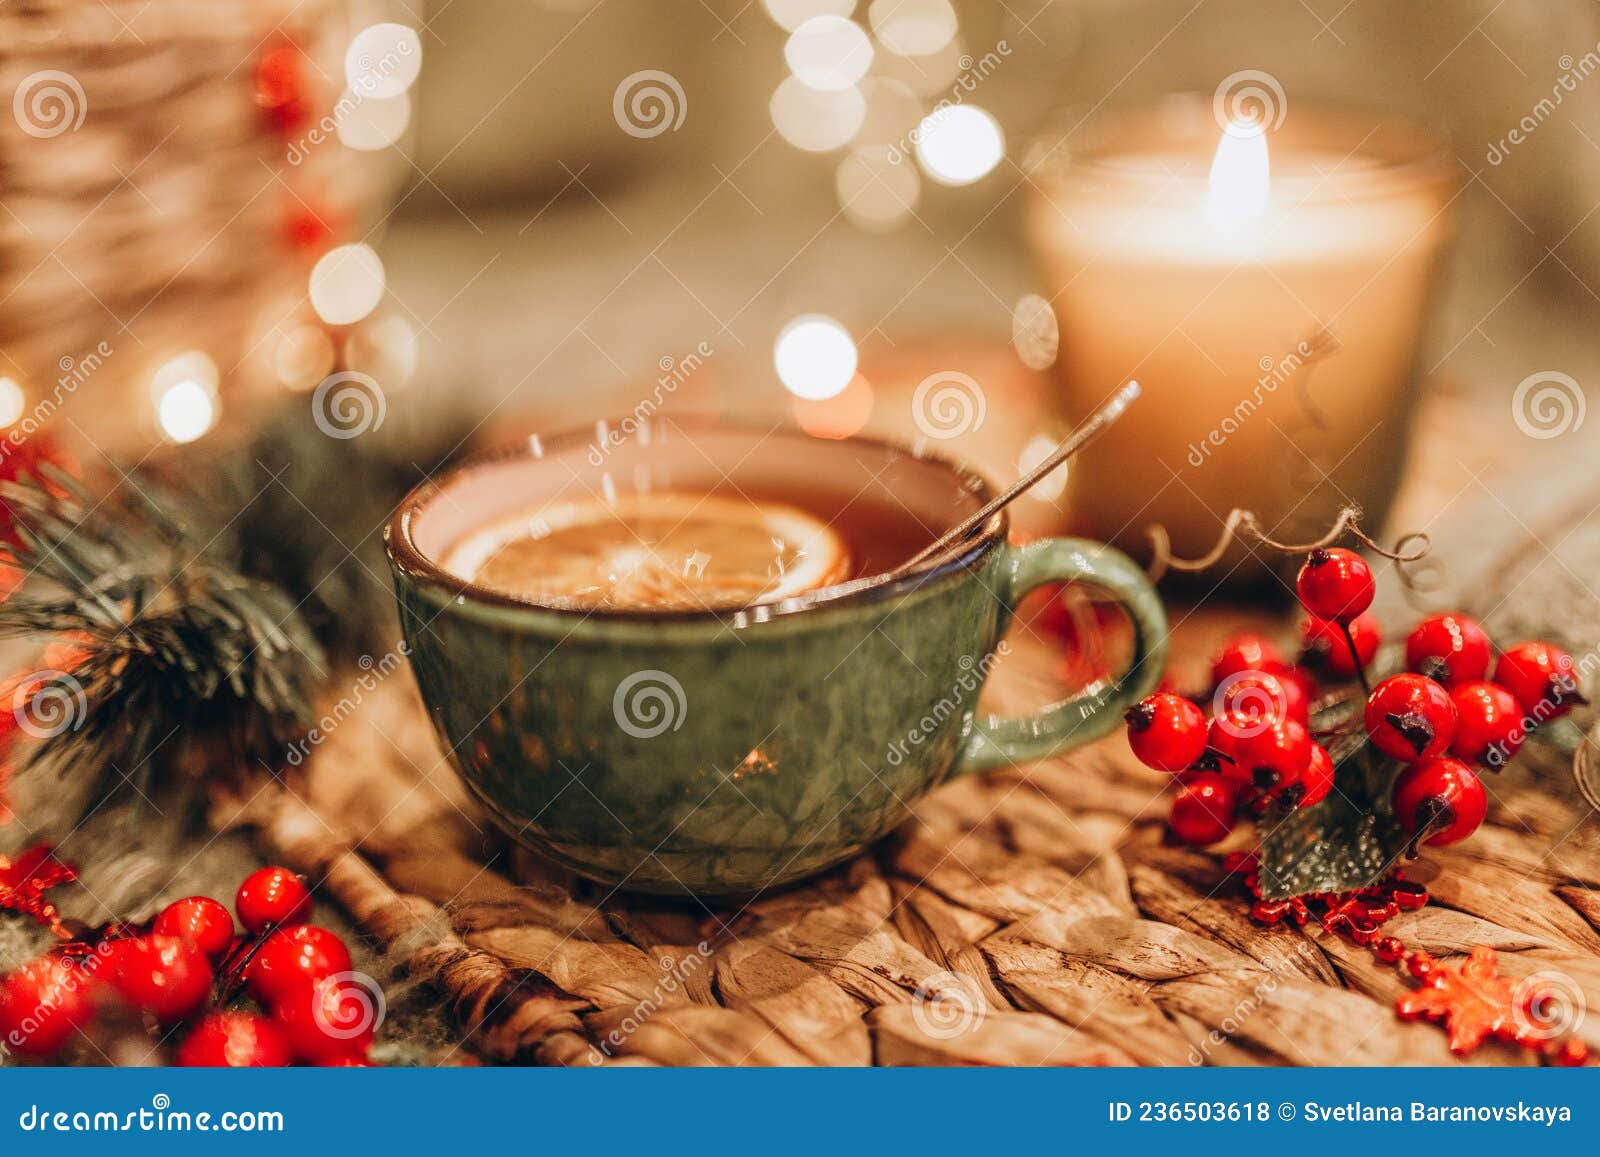 Evening Tea Party with Christmas Lights Hot Tea and Candy Stock Photo ...